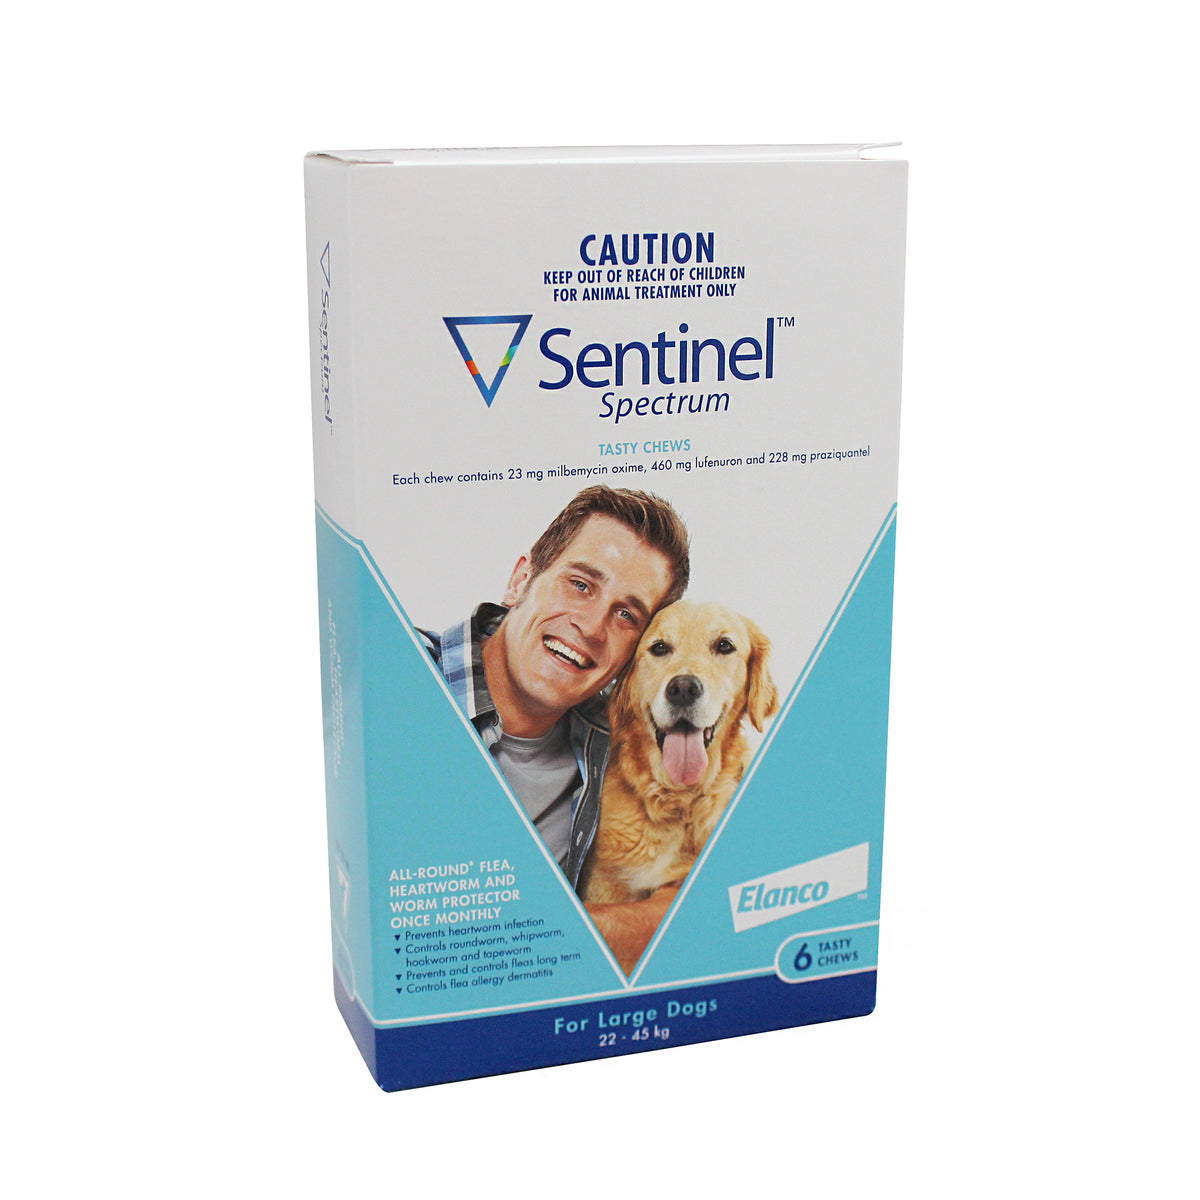 Sentinel Spectrum Chews Blue for Large Dogs 22-45kg